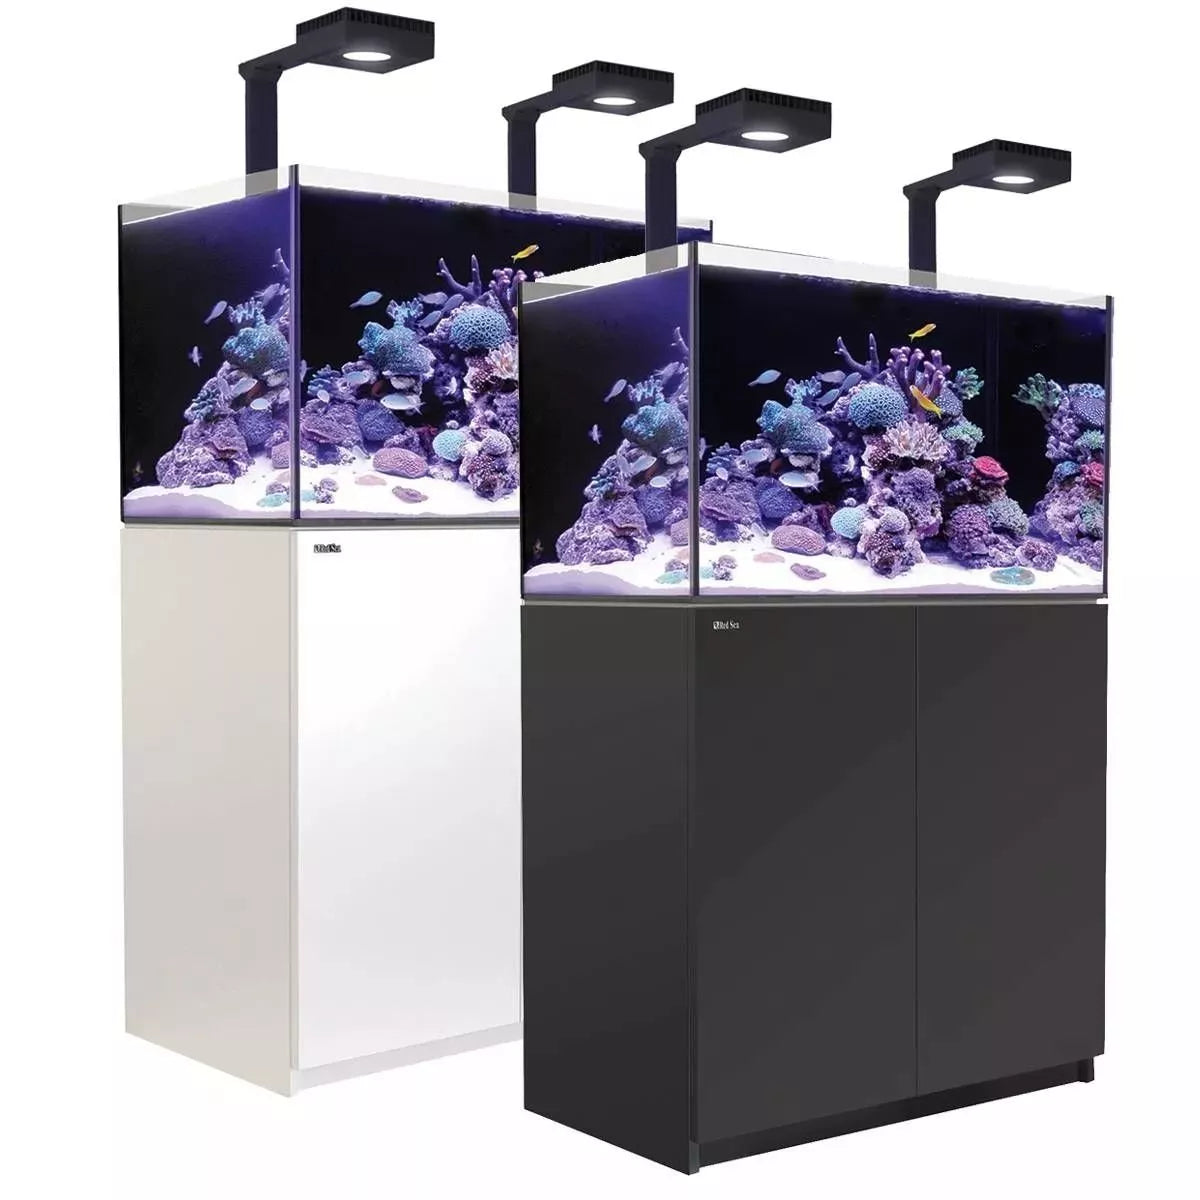 Reefer MAX 250 G2+ System (54 Gal) - Red Sea